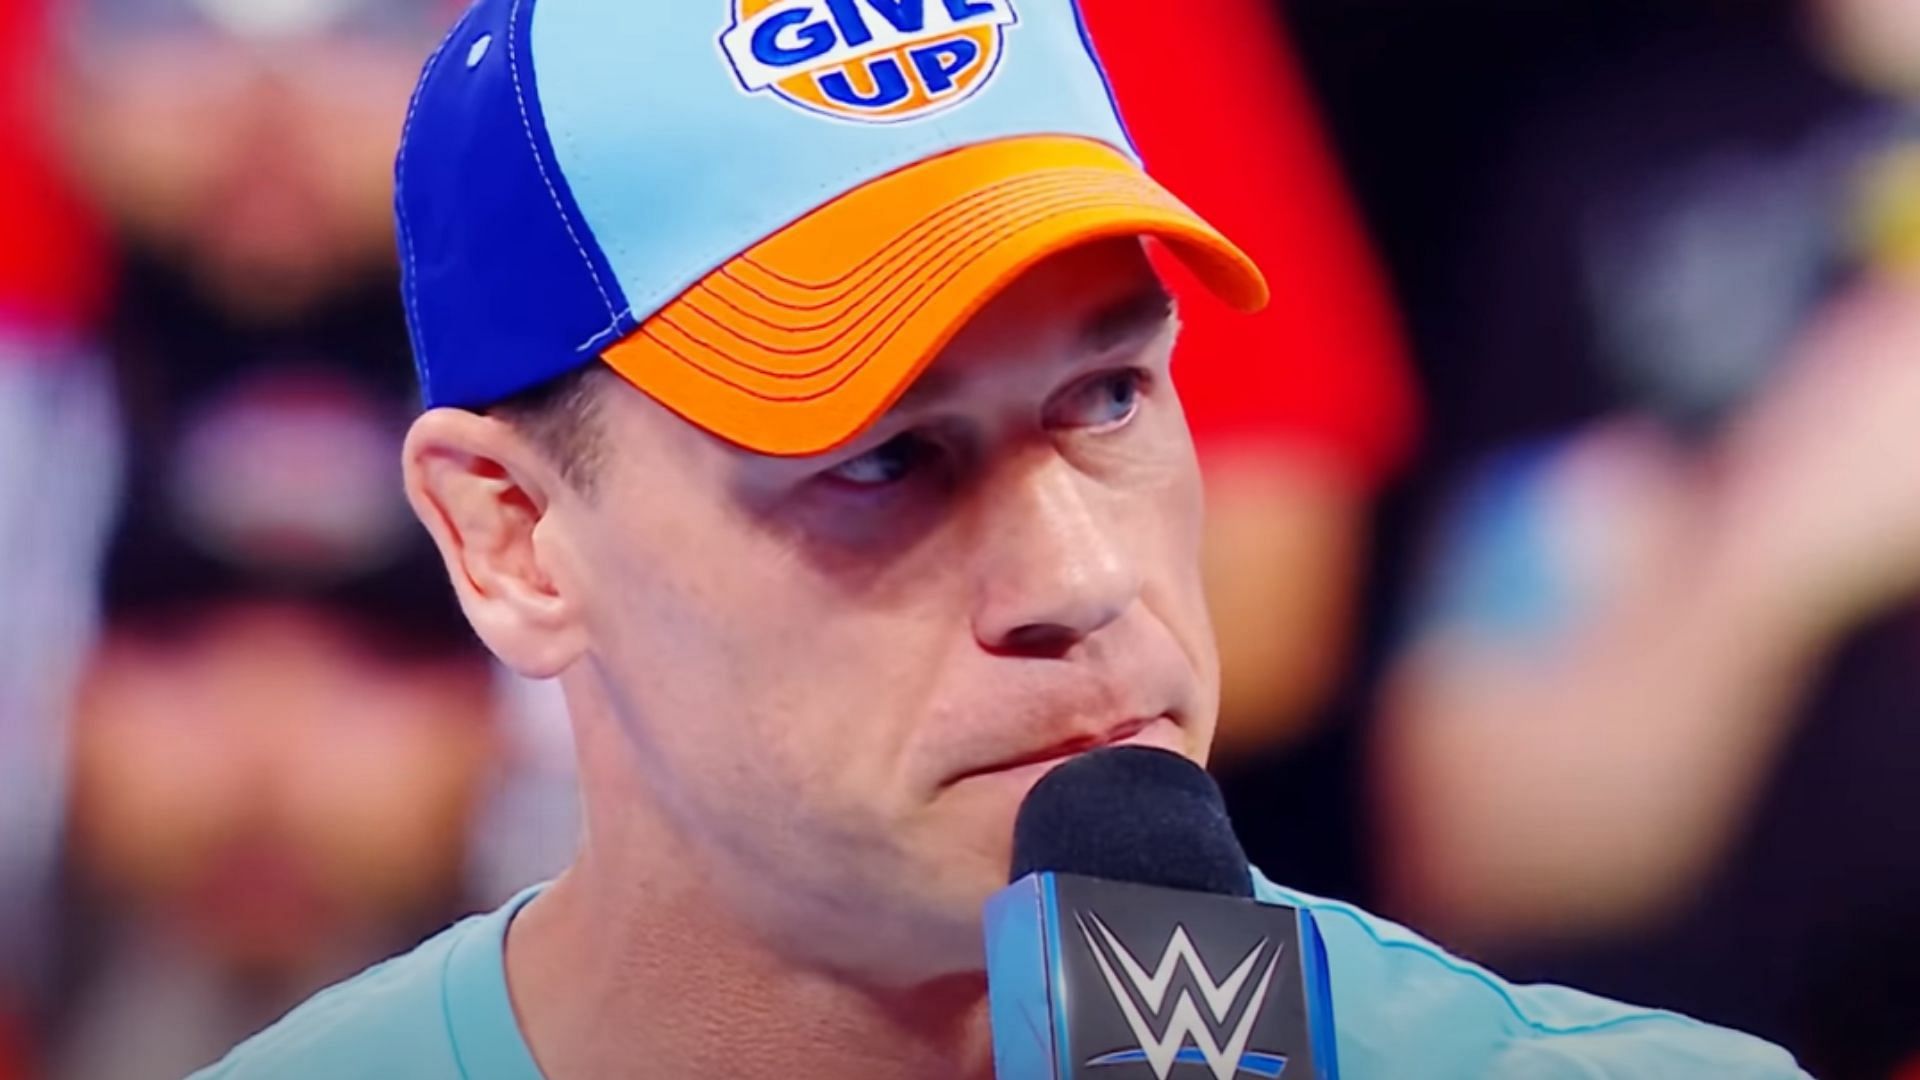 John Cena is viewed by many as one of WWE